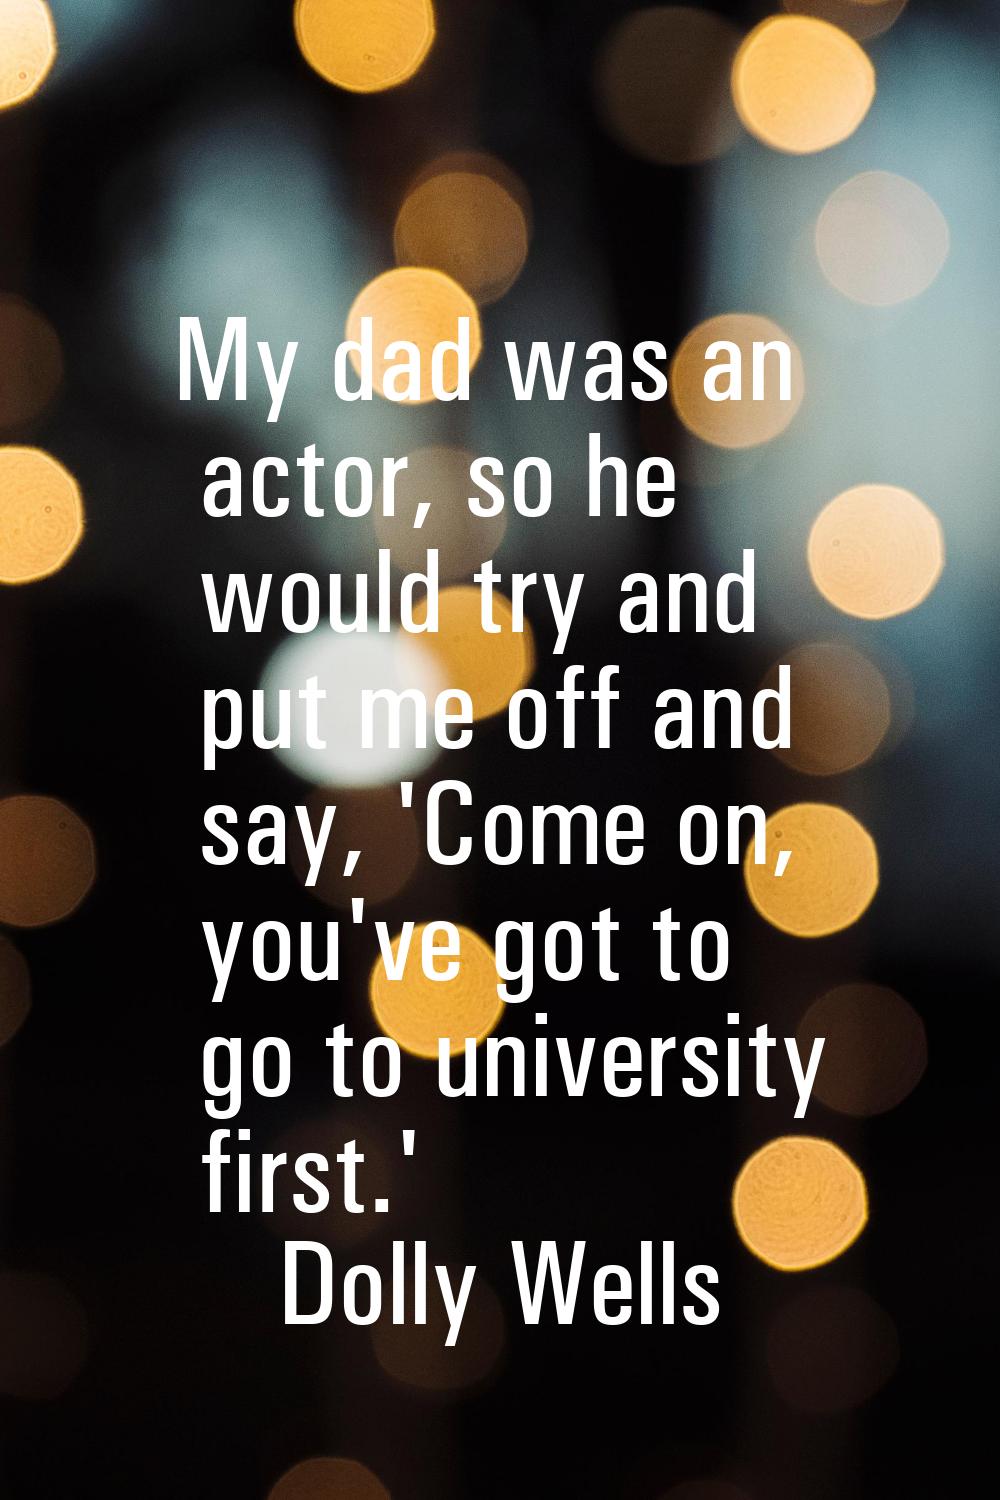 My dad was an actor, so he would try and put me off and say, 'Come on, you've got to go to universi